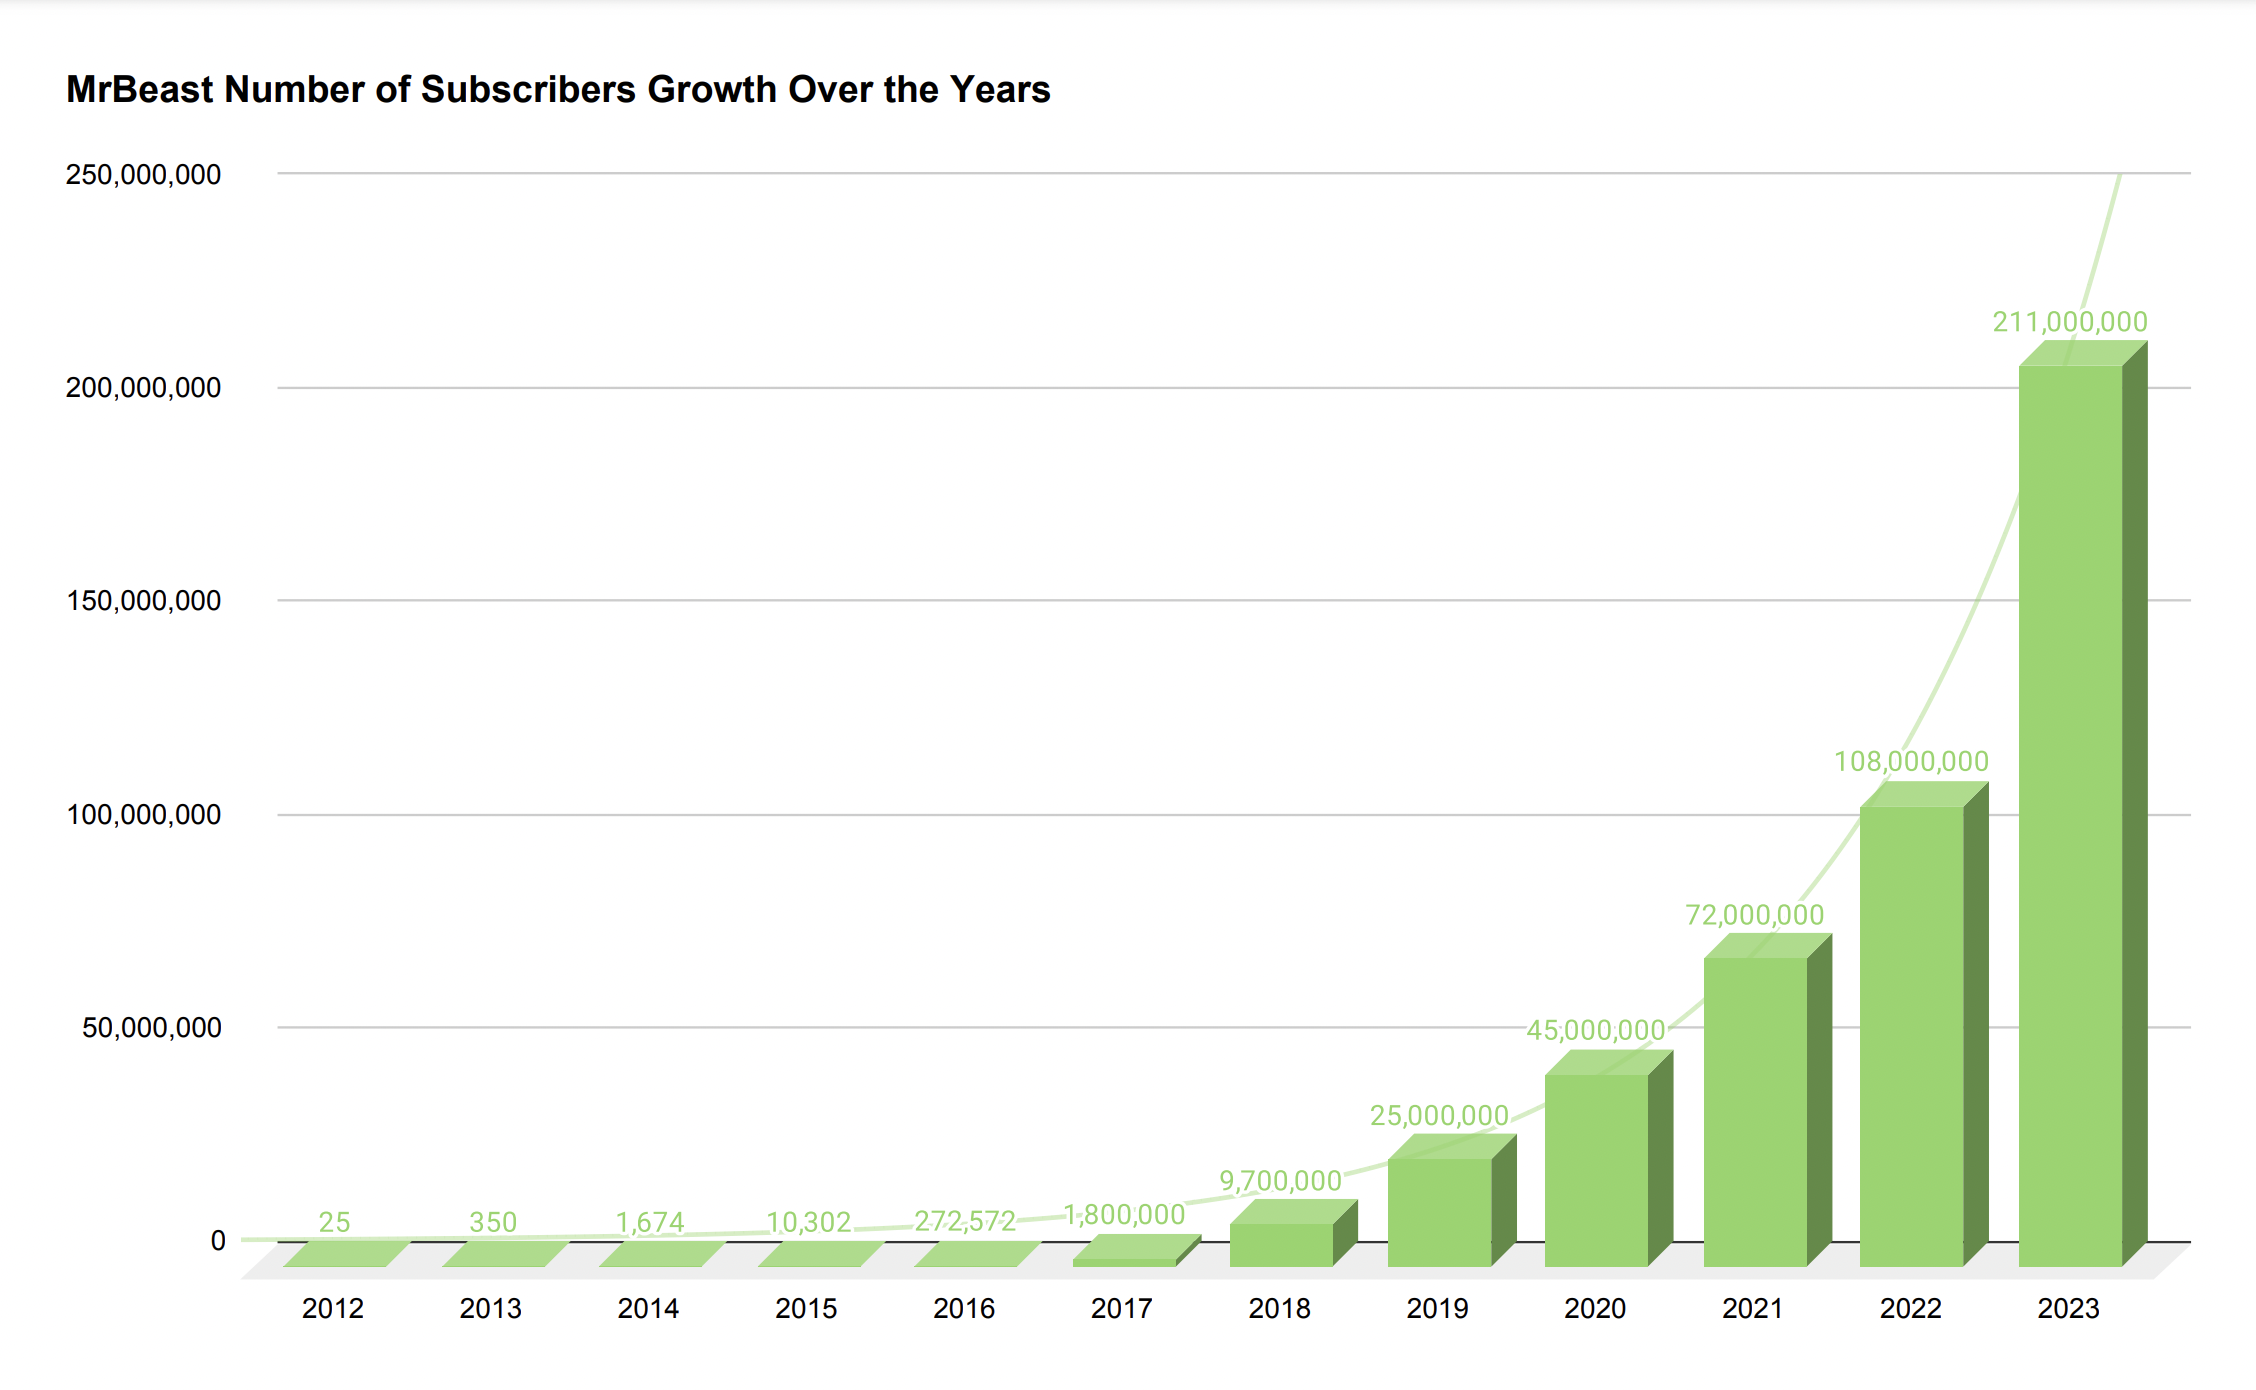 MrBeast Number of Subscribers Growth Over the Years